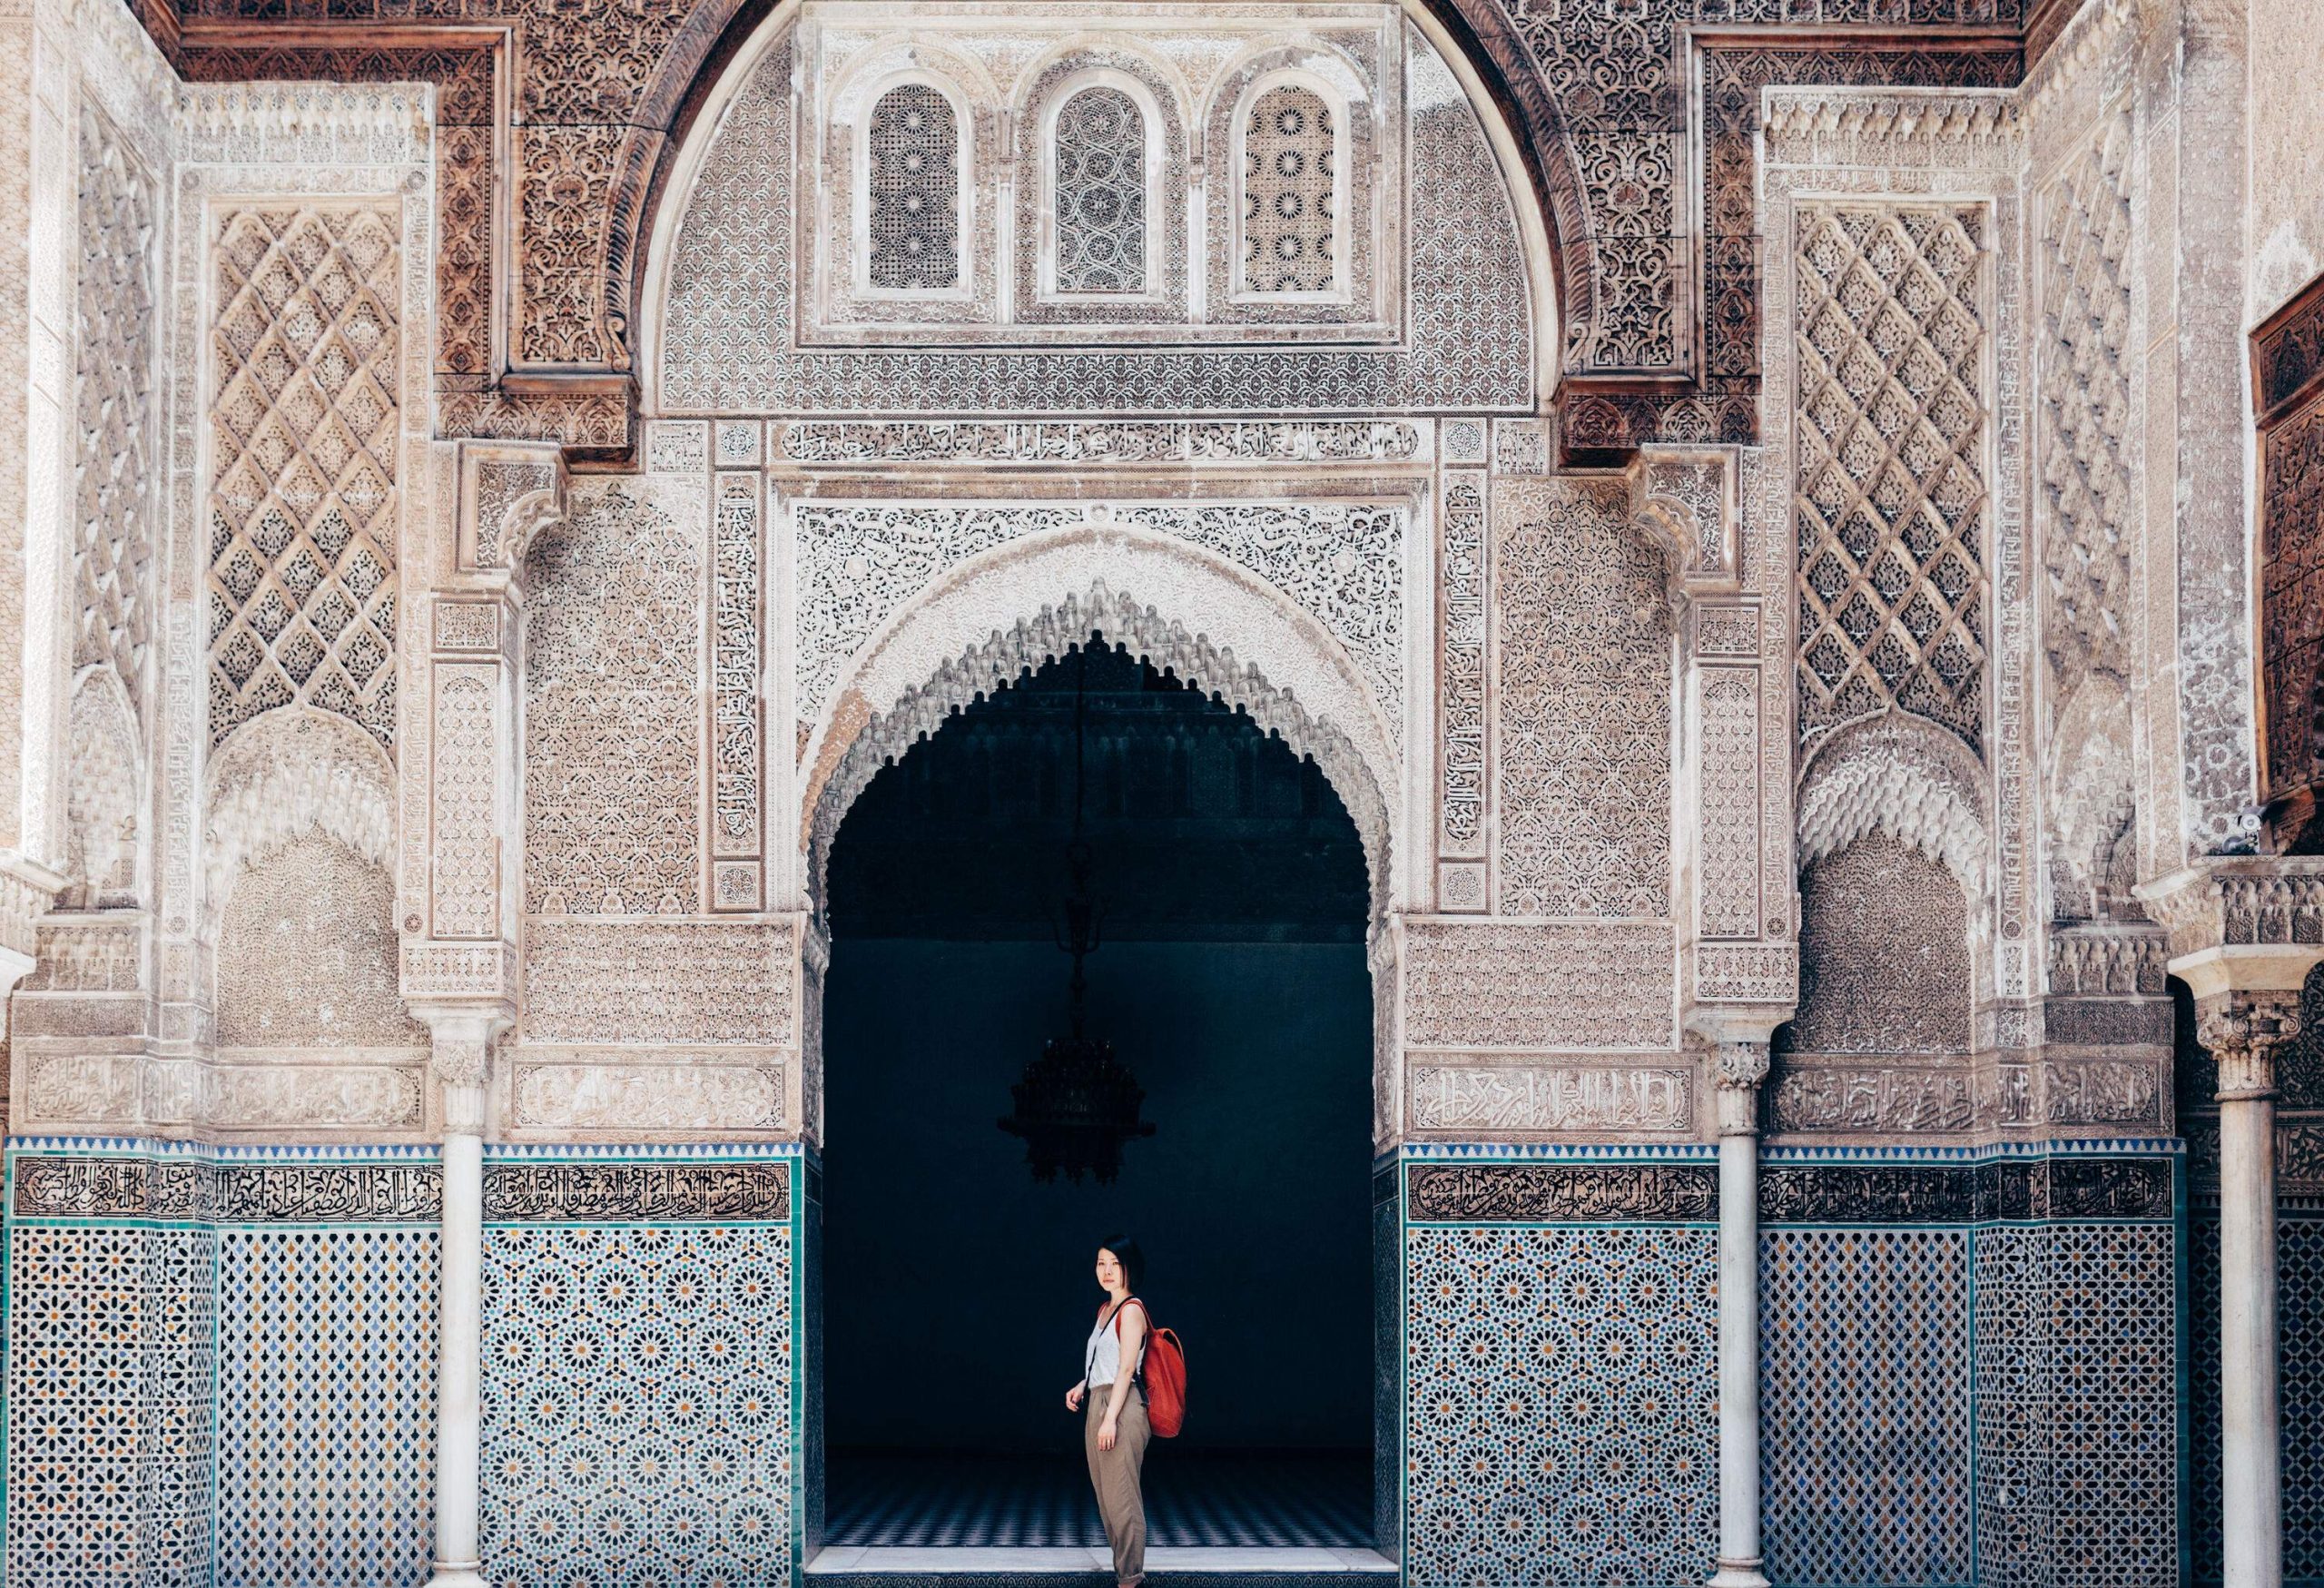 A woman stands under a building's arch entrance with walls intricately carved with unique geometric patterns.